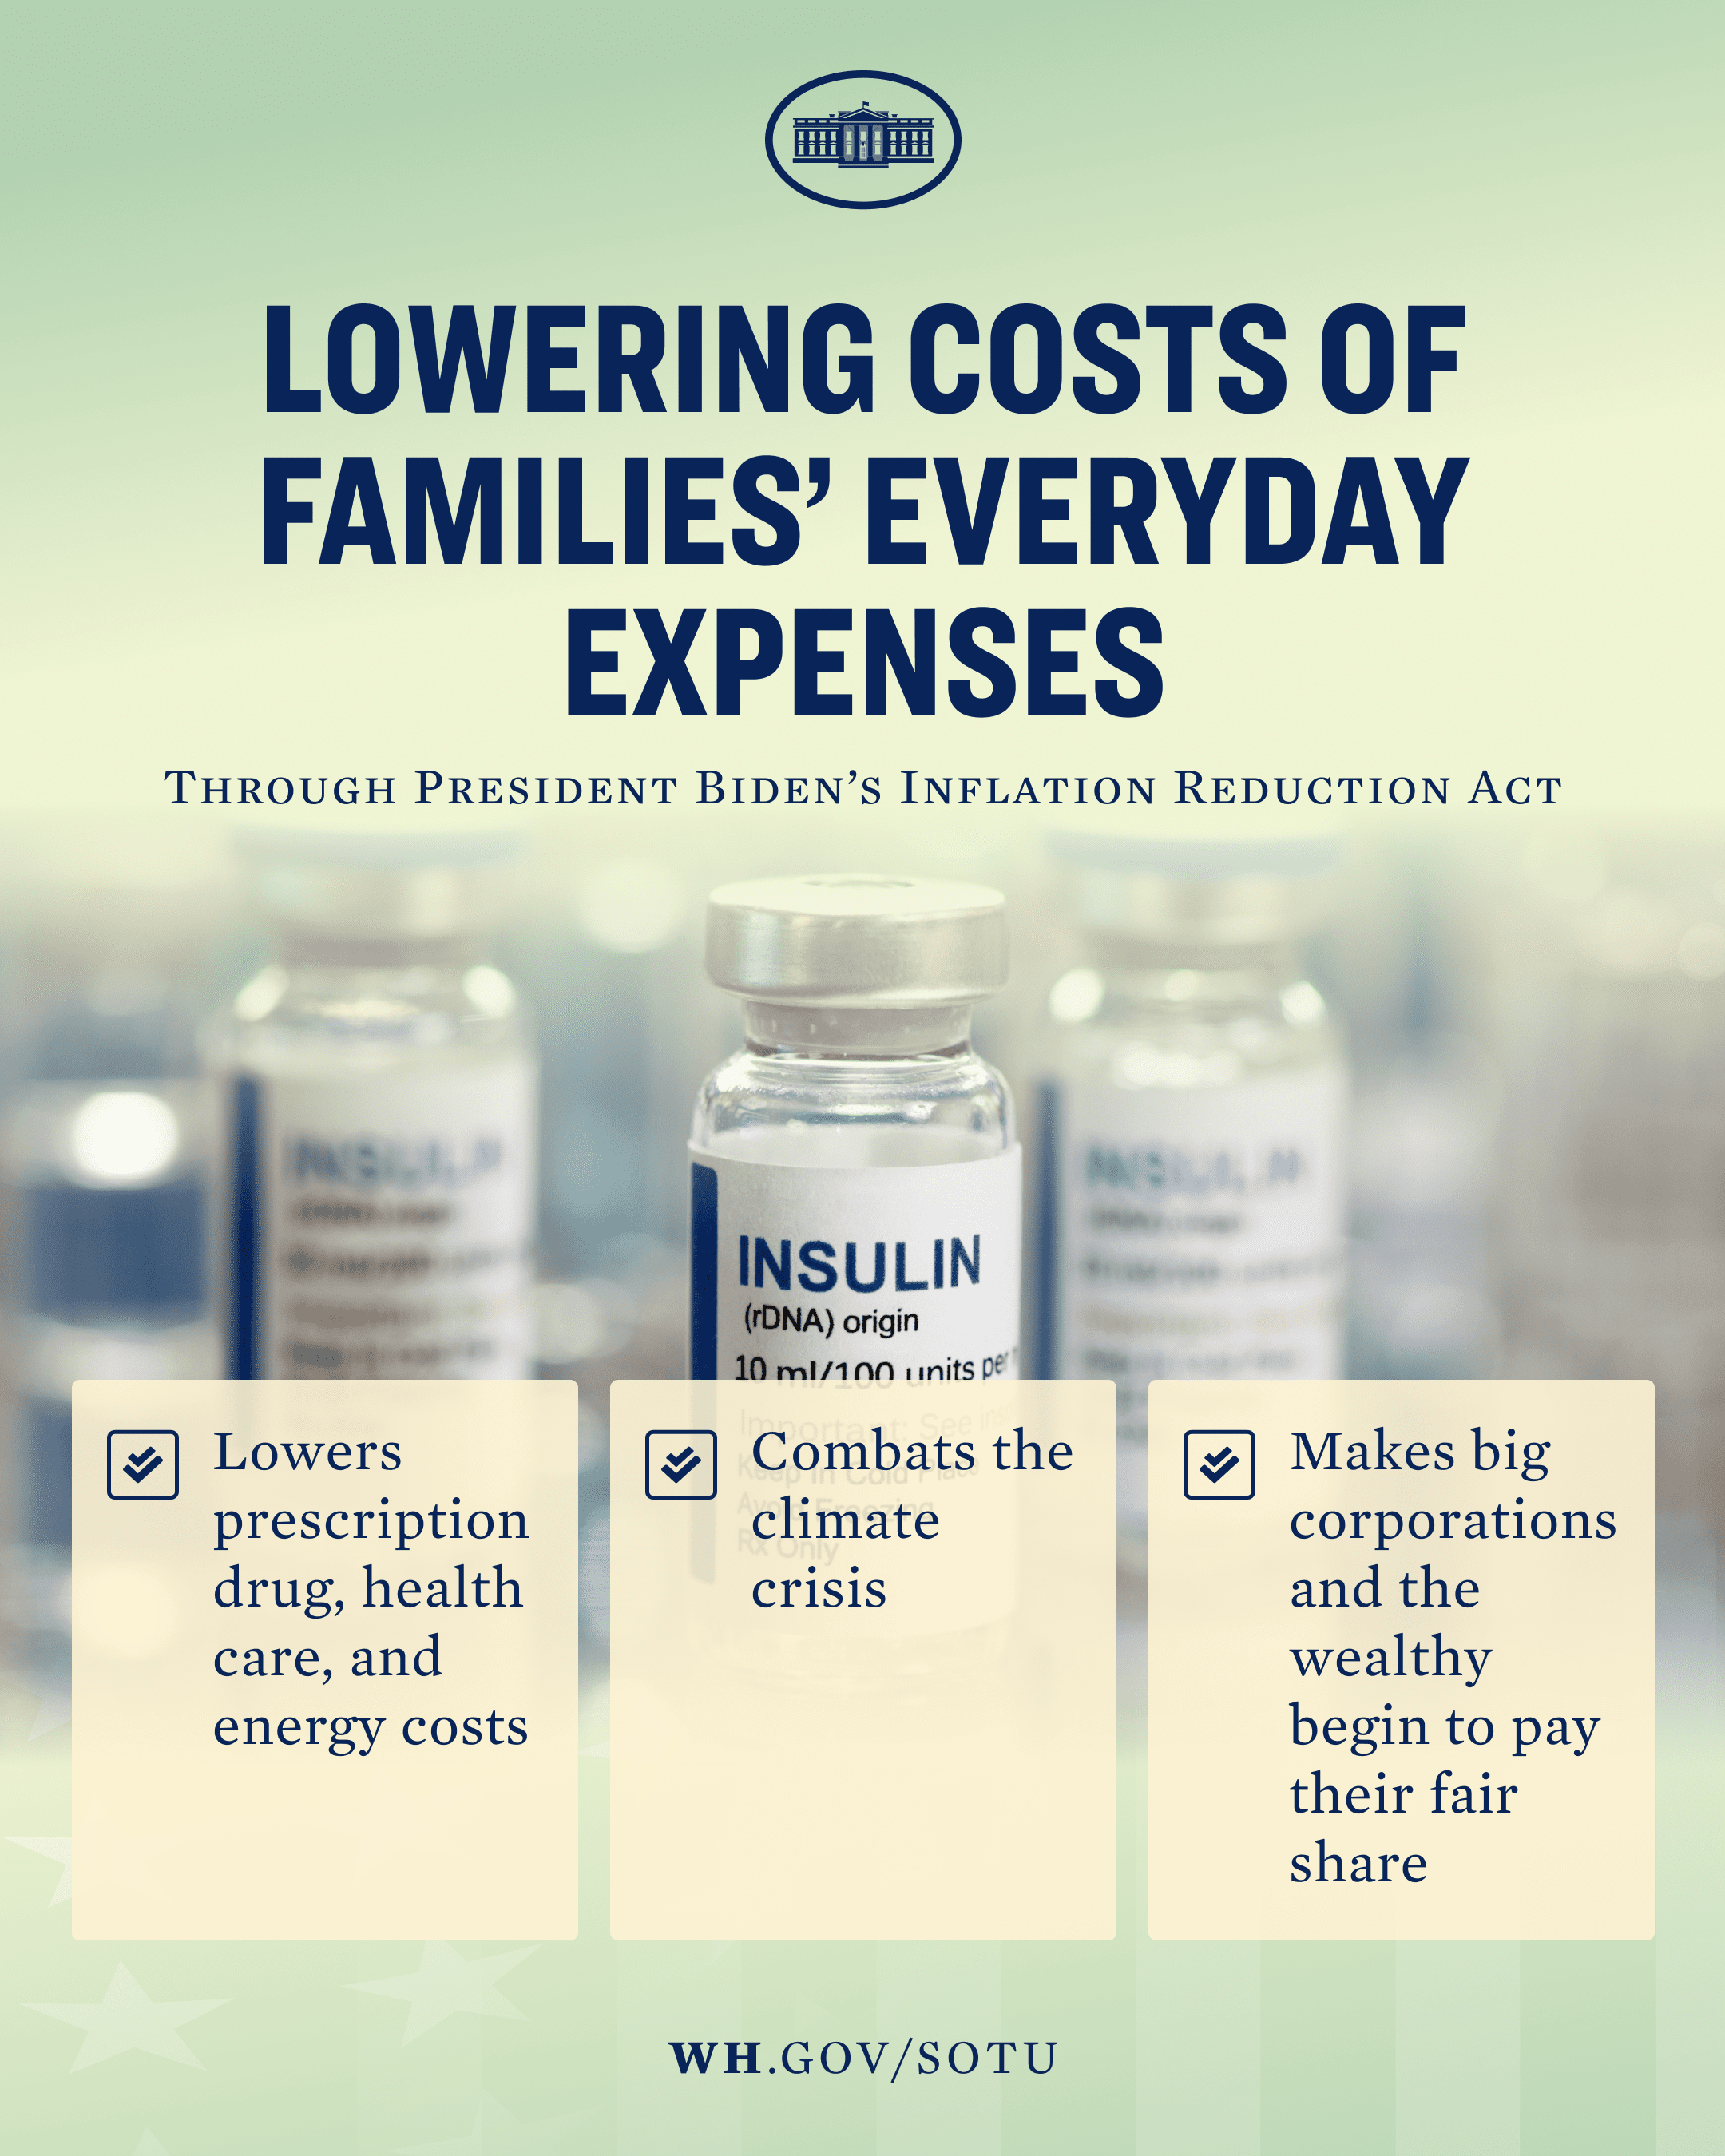 Lowering costs of Families’ everyday expenses through President Biden’s Inflation Reduction Act